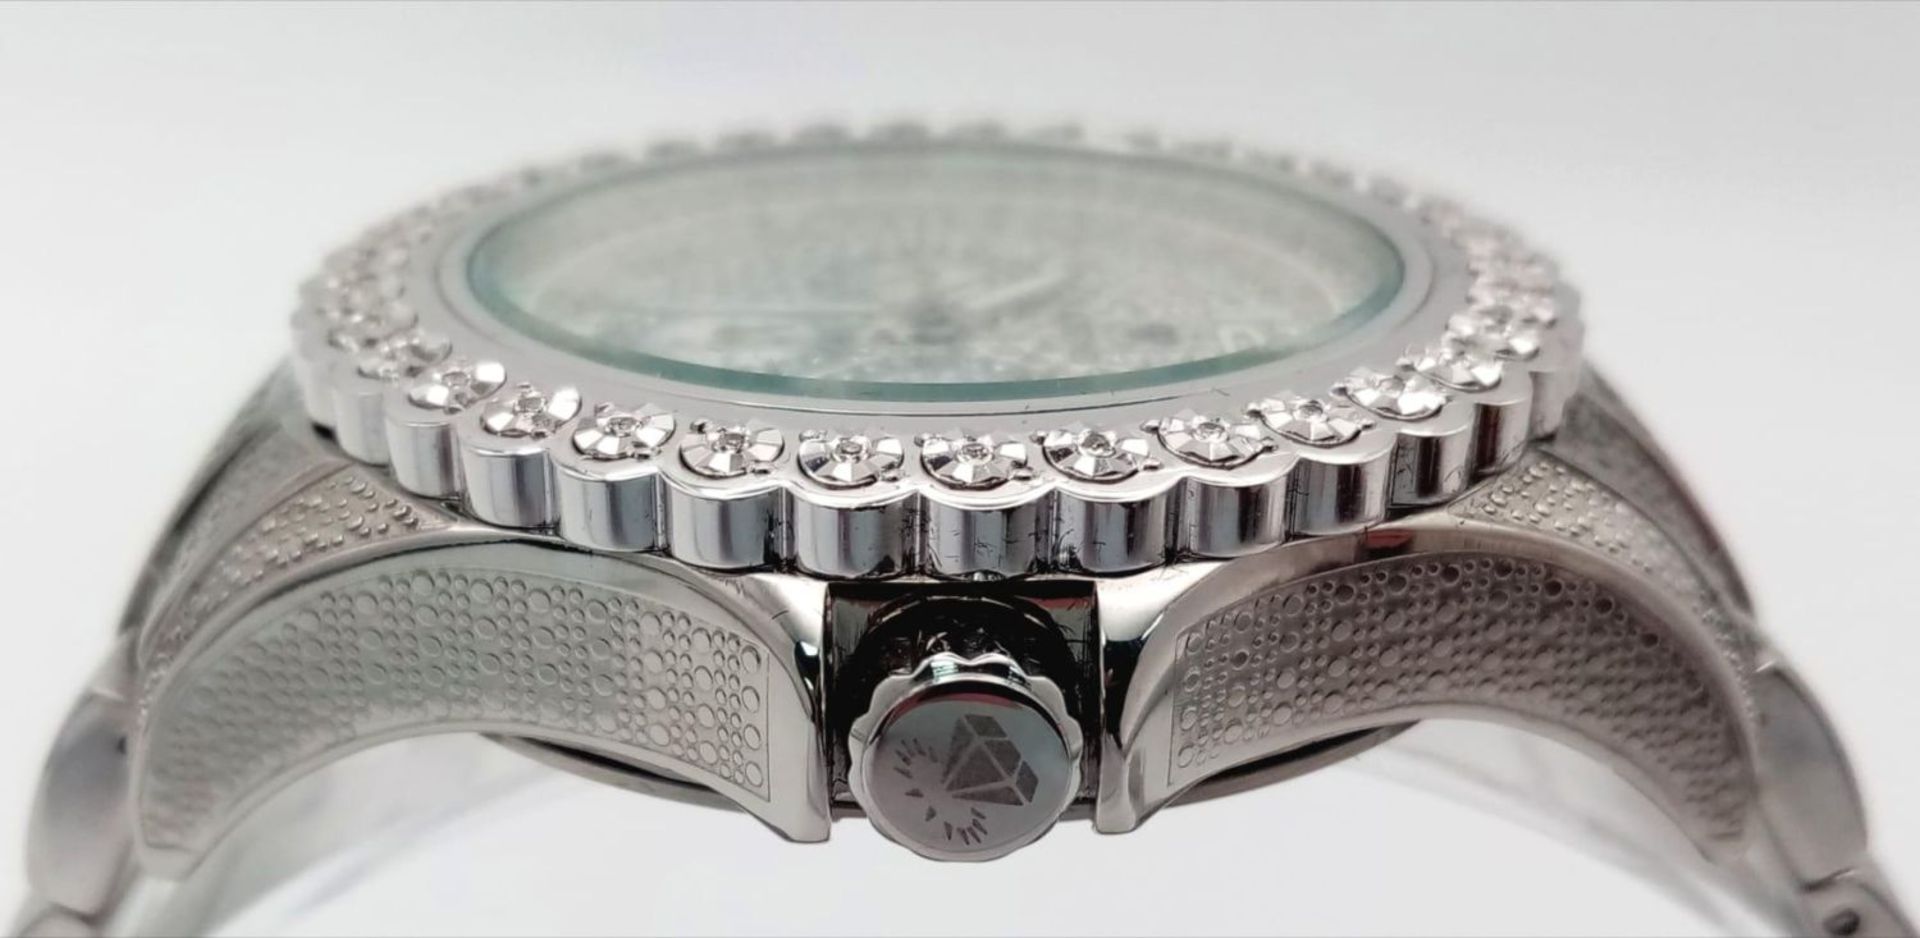 An Icetime Diamond Quartz Gents Watch. Stainless steel bracelet and case - 47mm. White stone - Image 4 of 8